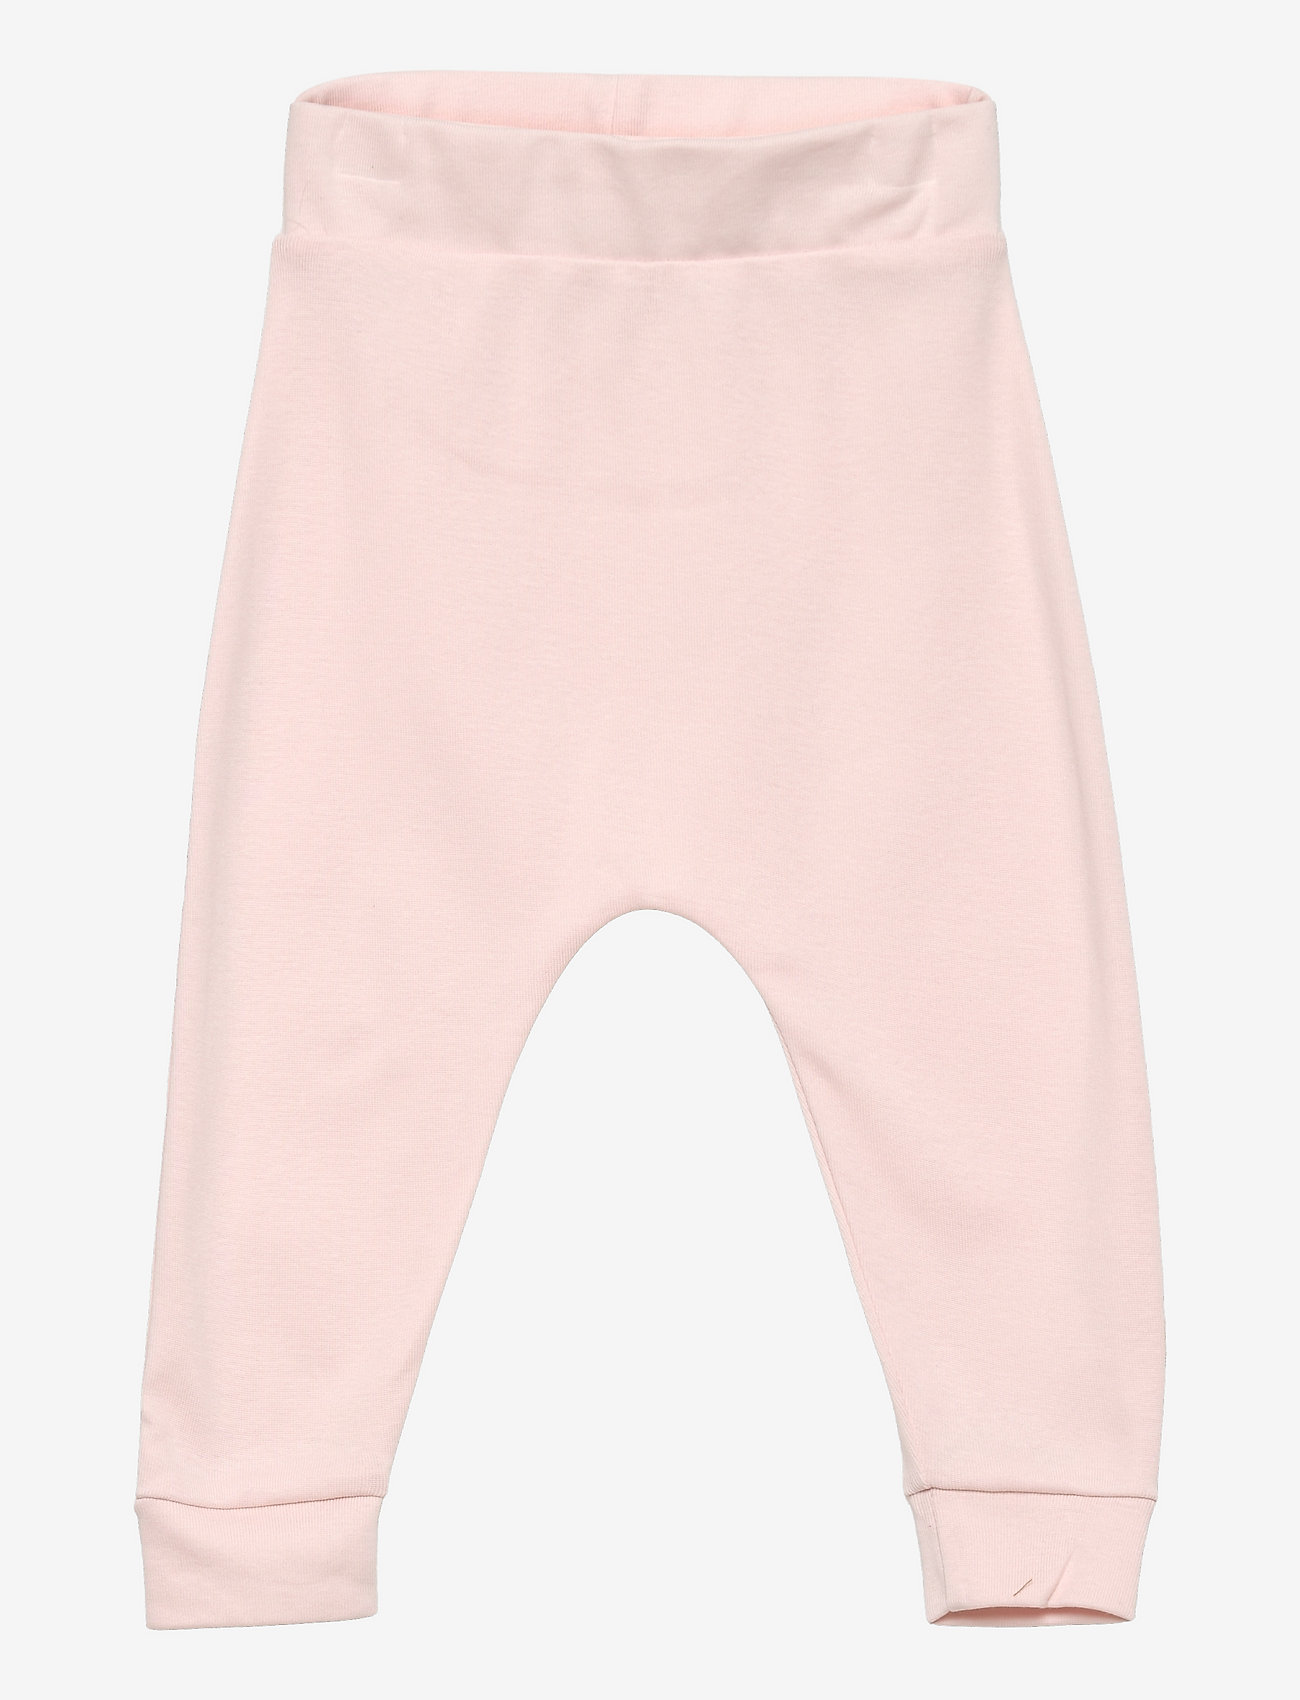 Smallstuff - Pants - lowest prices - soft rose - 0